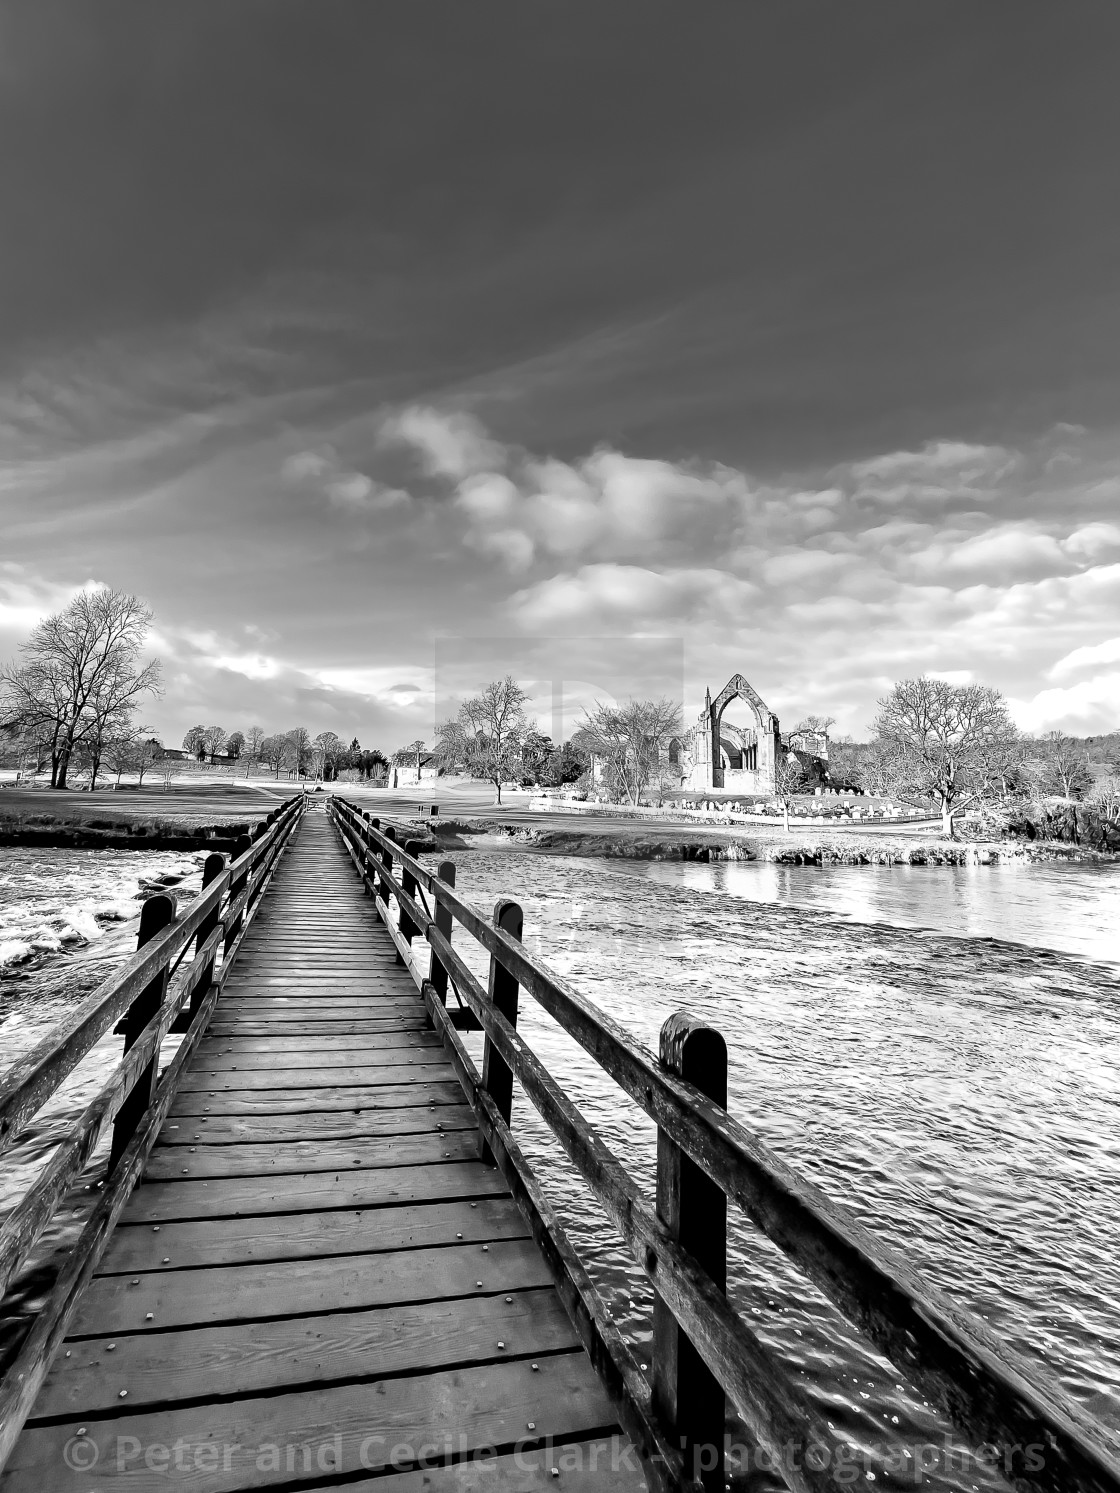 "River Wharfe Footbridge, Bolton Abbey, Yorkshire, Priory Ruins in the Background." stock image